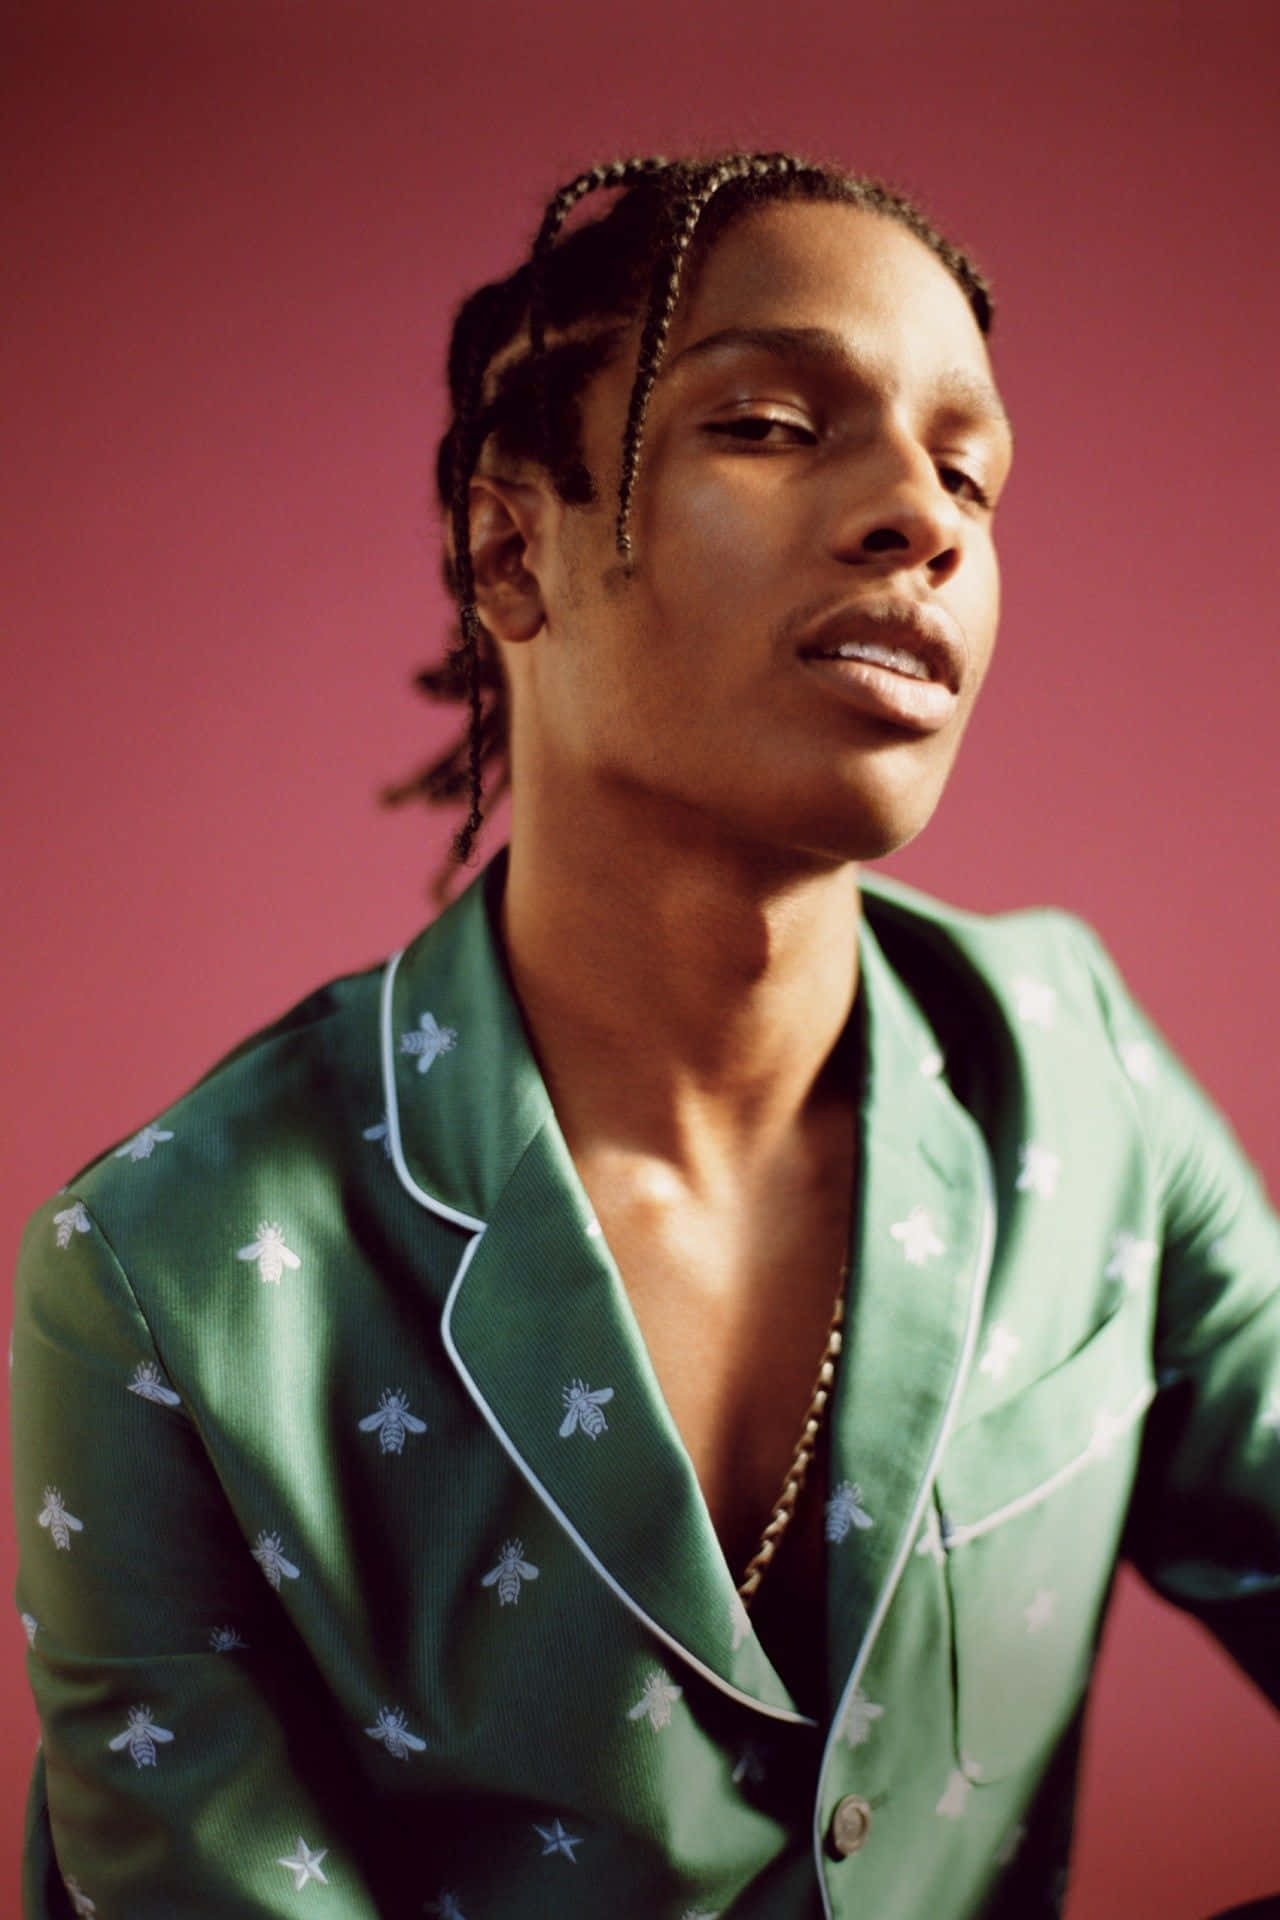 Asap Rocky rocks the crowd with passionate energy